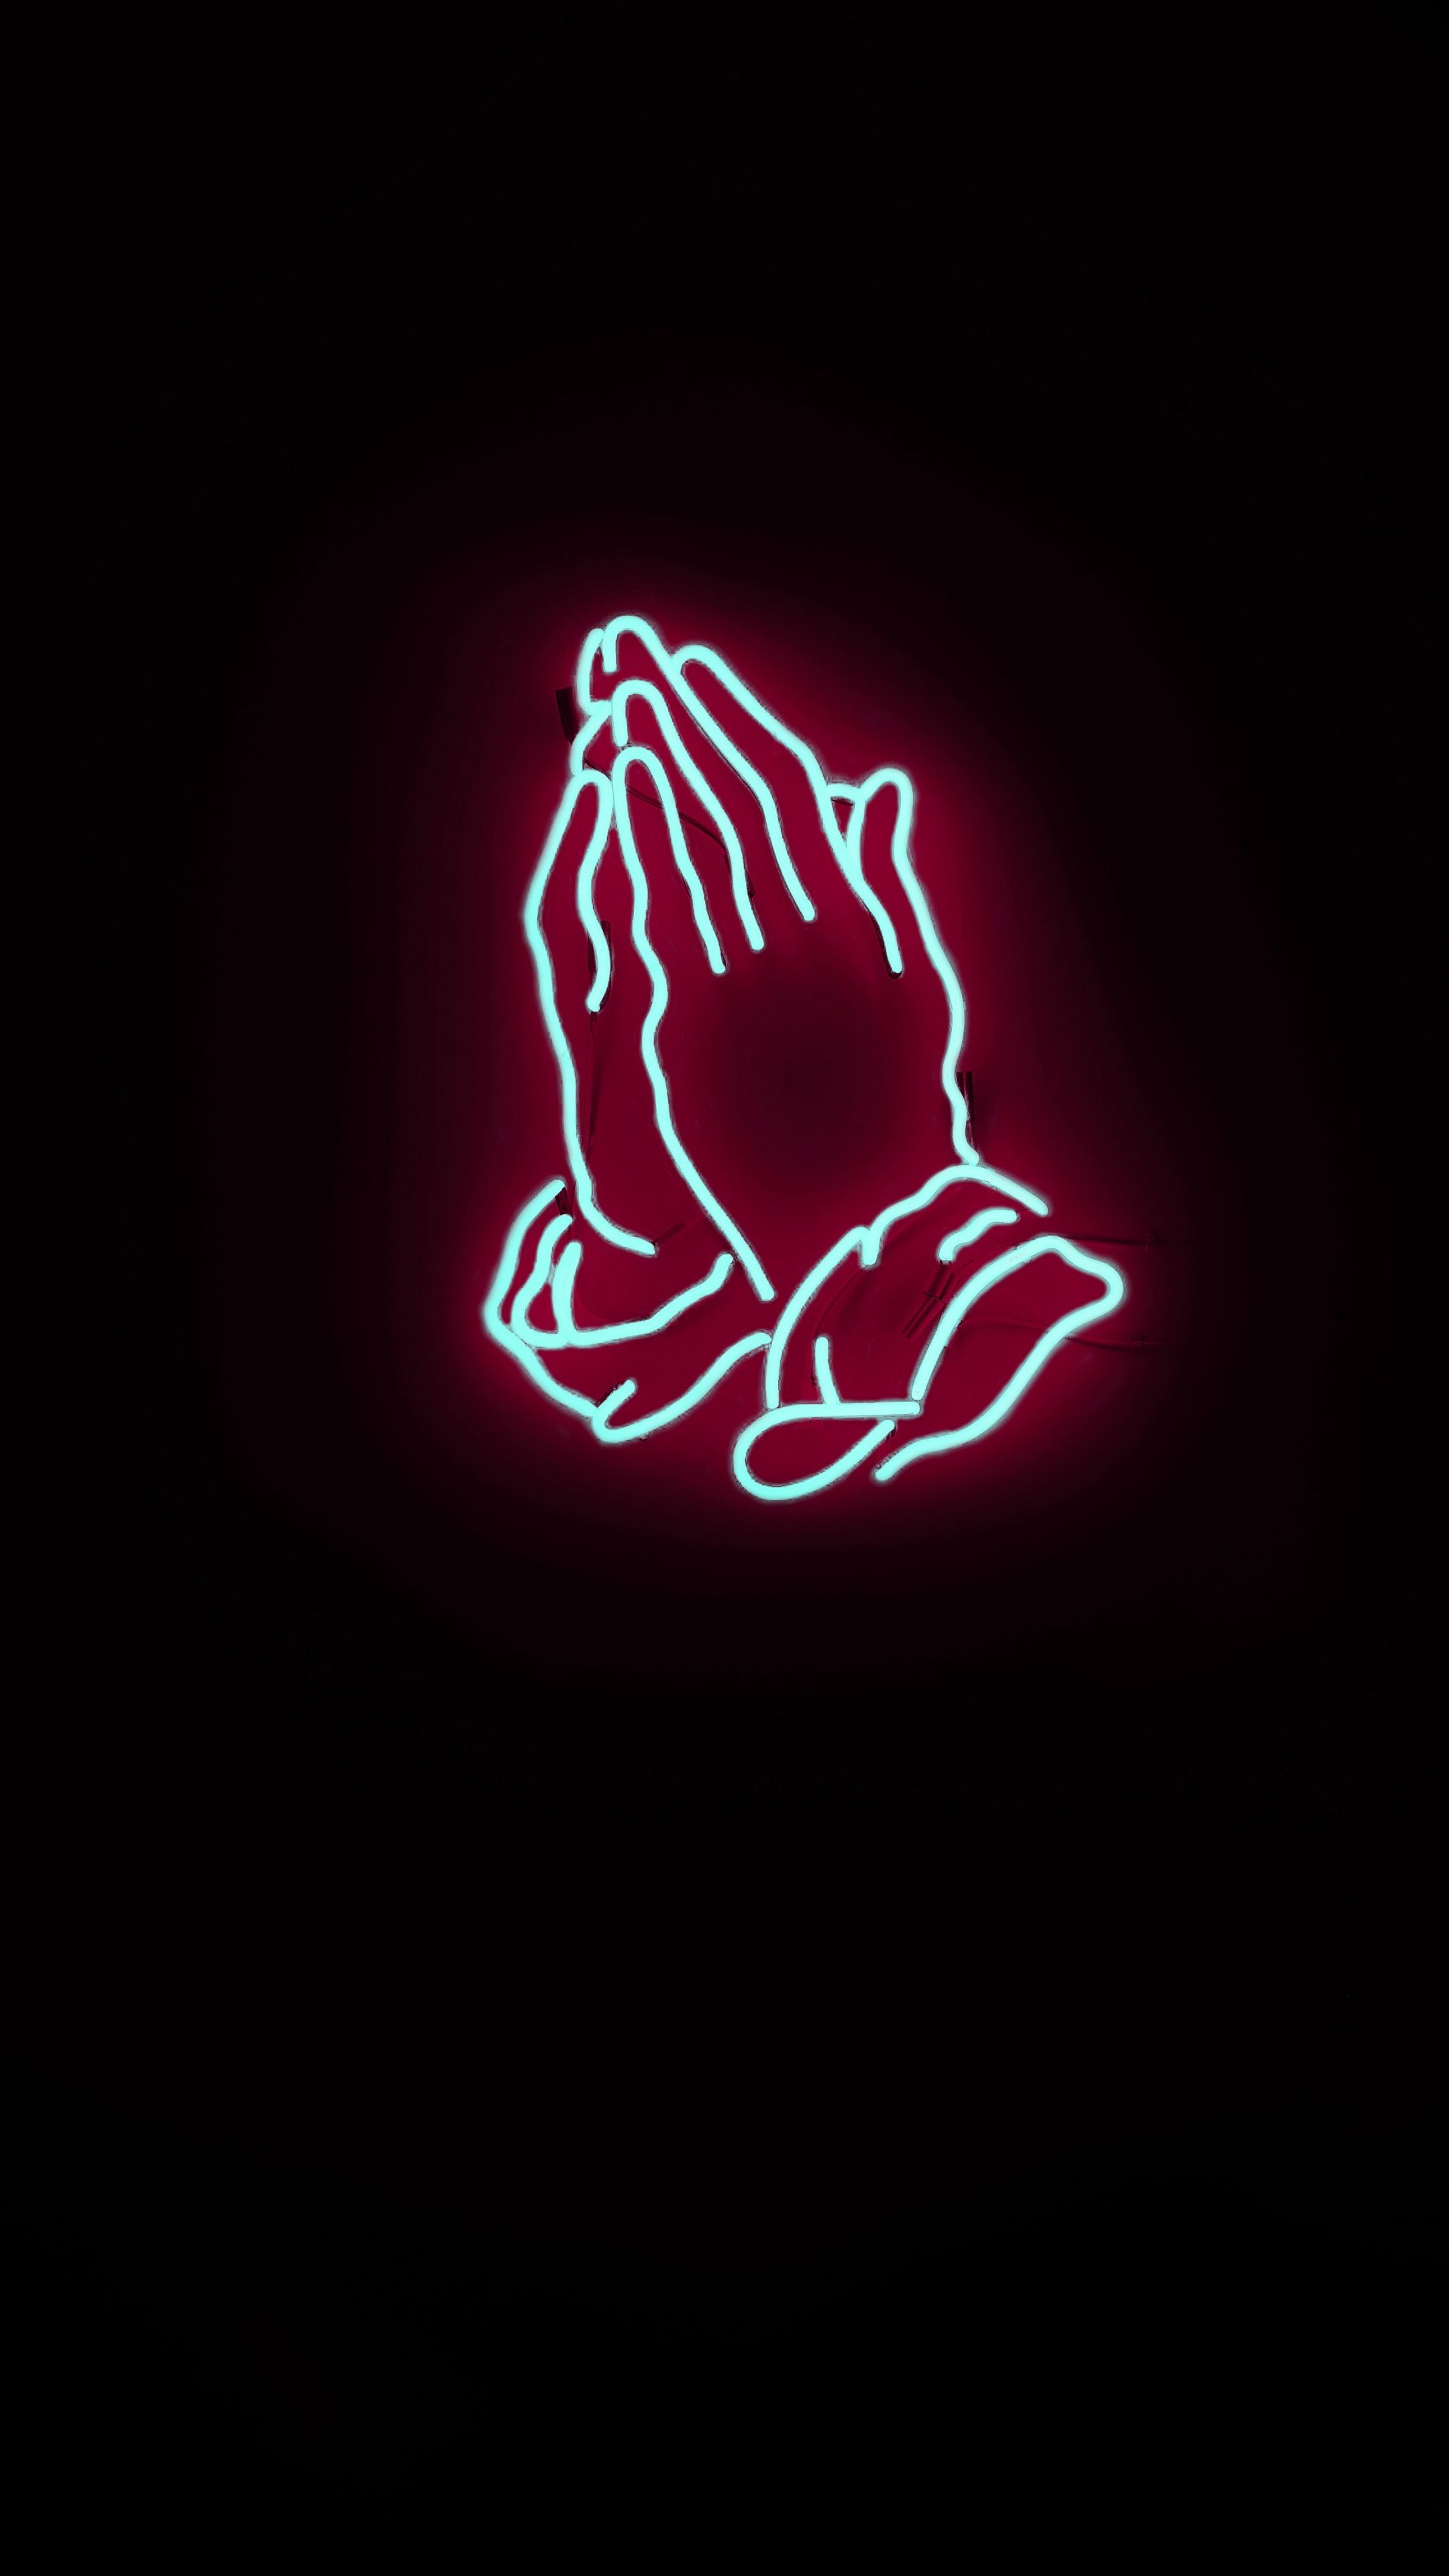 Misc #neon #hands #prayer #wallpaper HD 4k background for android